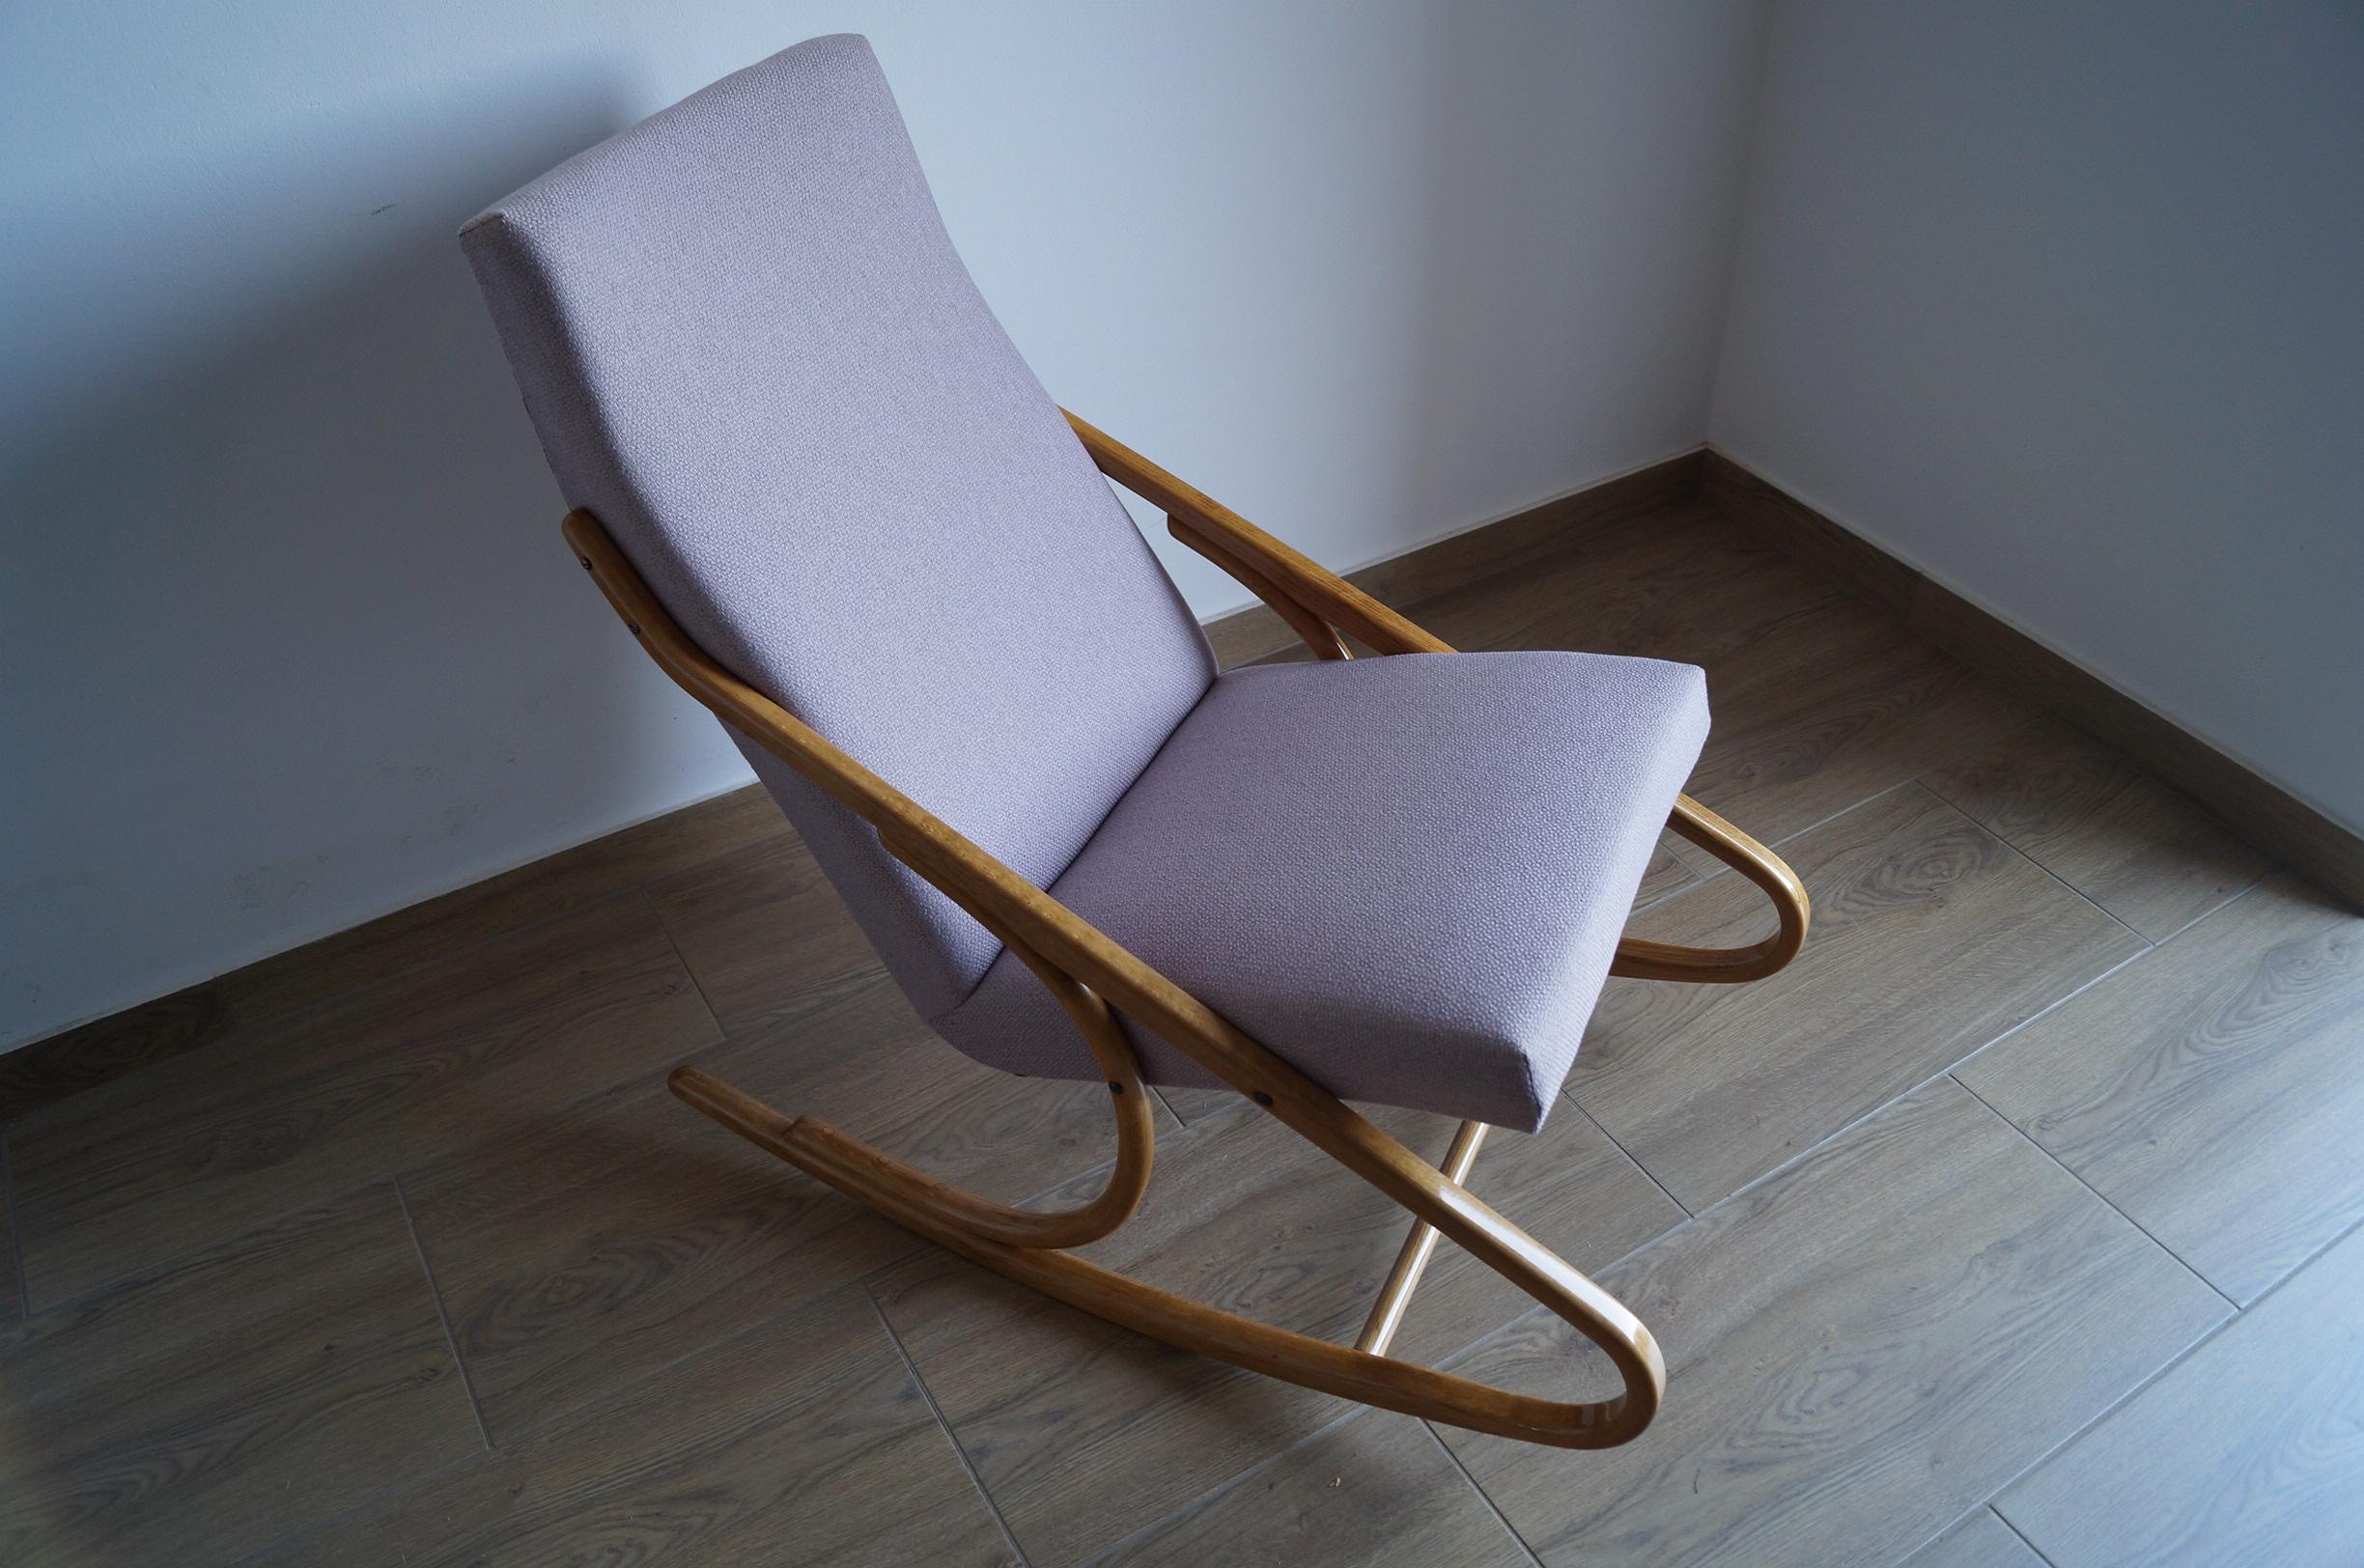 We present the rocking chair by the famous Czech designer J. Halabala coming from Prague, the Czech Republic. Jindrich Halabala - (a Czech designer ranked among the most outstanding creators of the modern period. The peak of his career fell on the